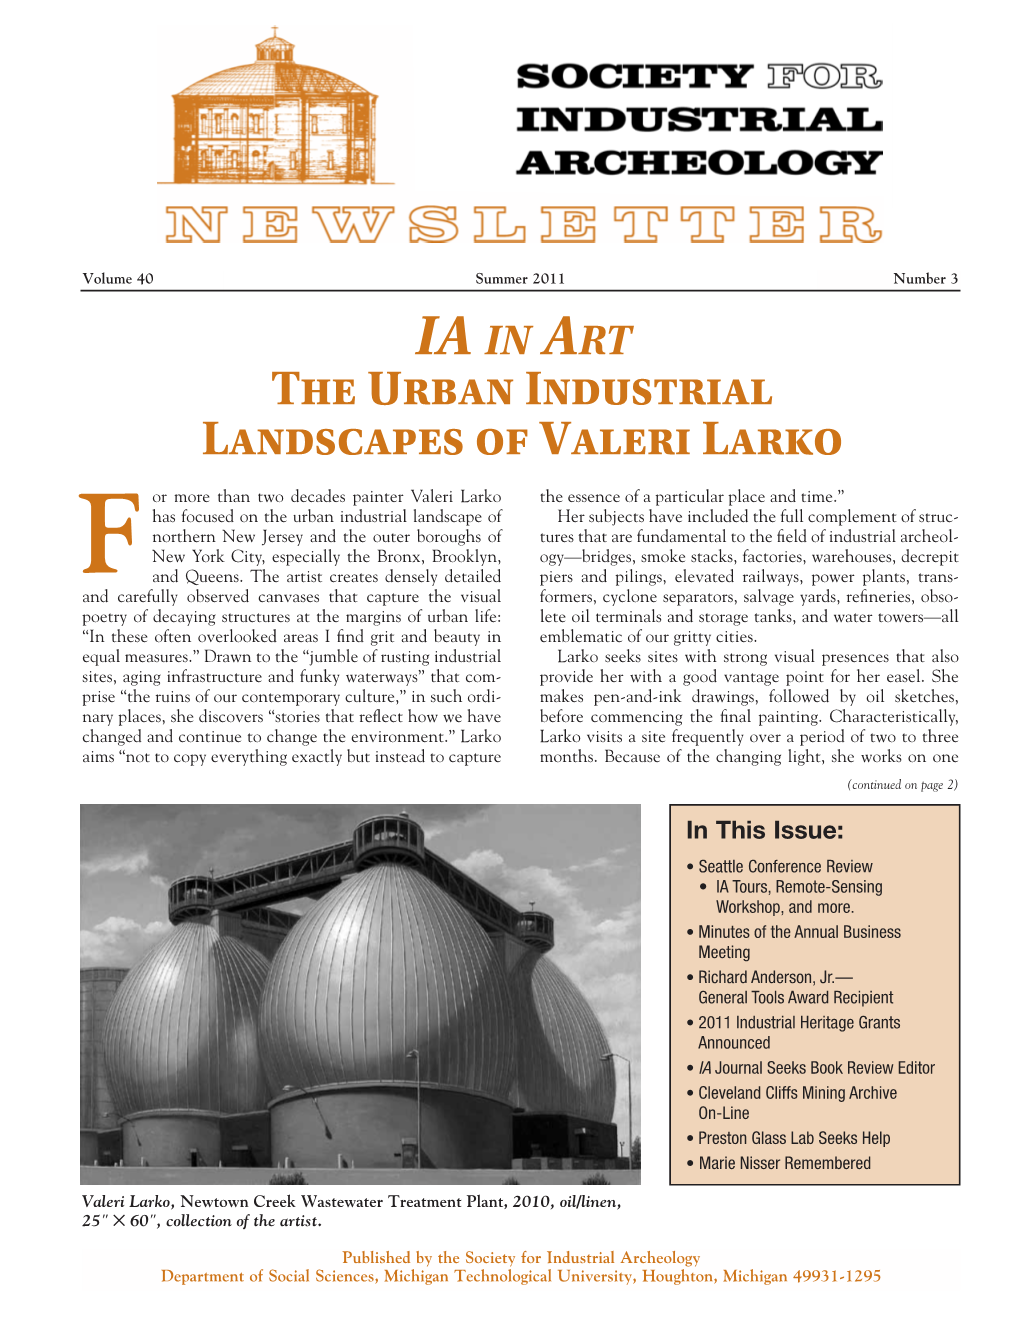 Society for Industrial Archeology Newsletter (SIAN) Vol. 40, No. 3